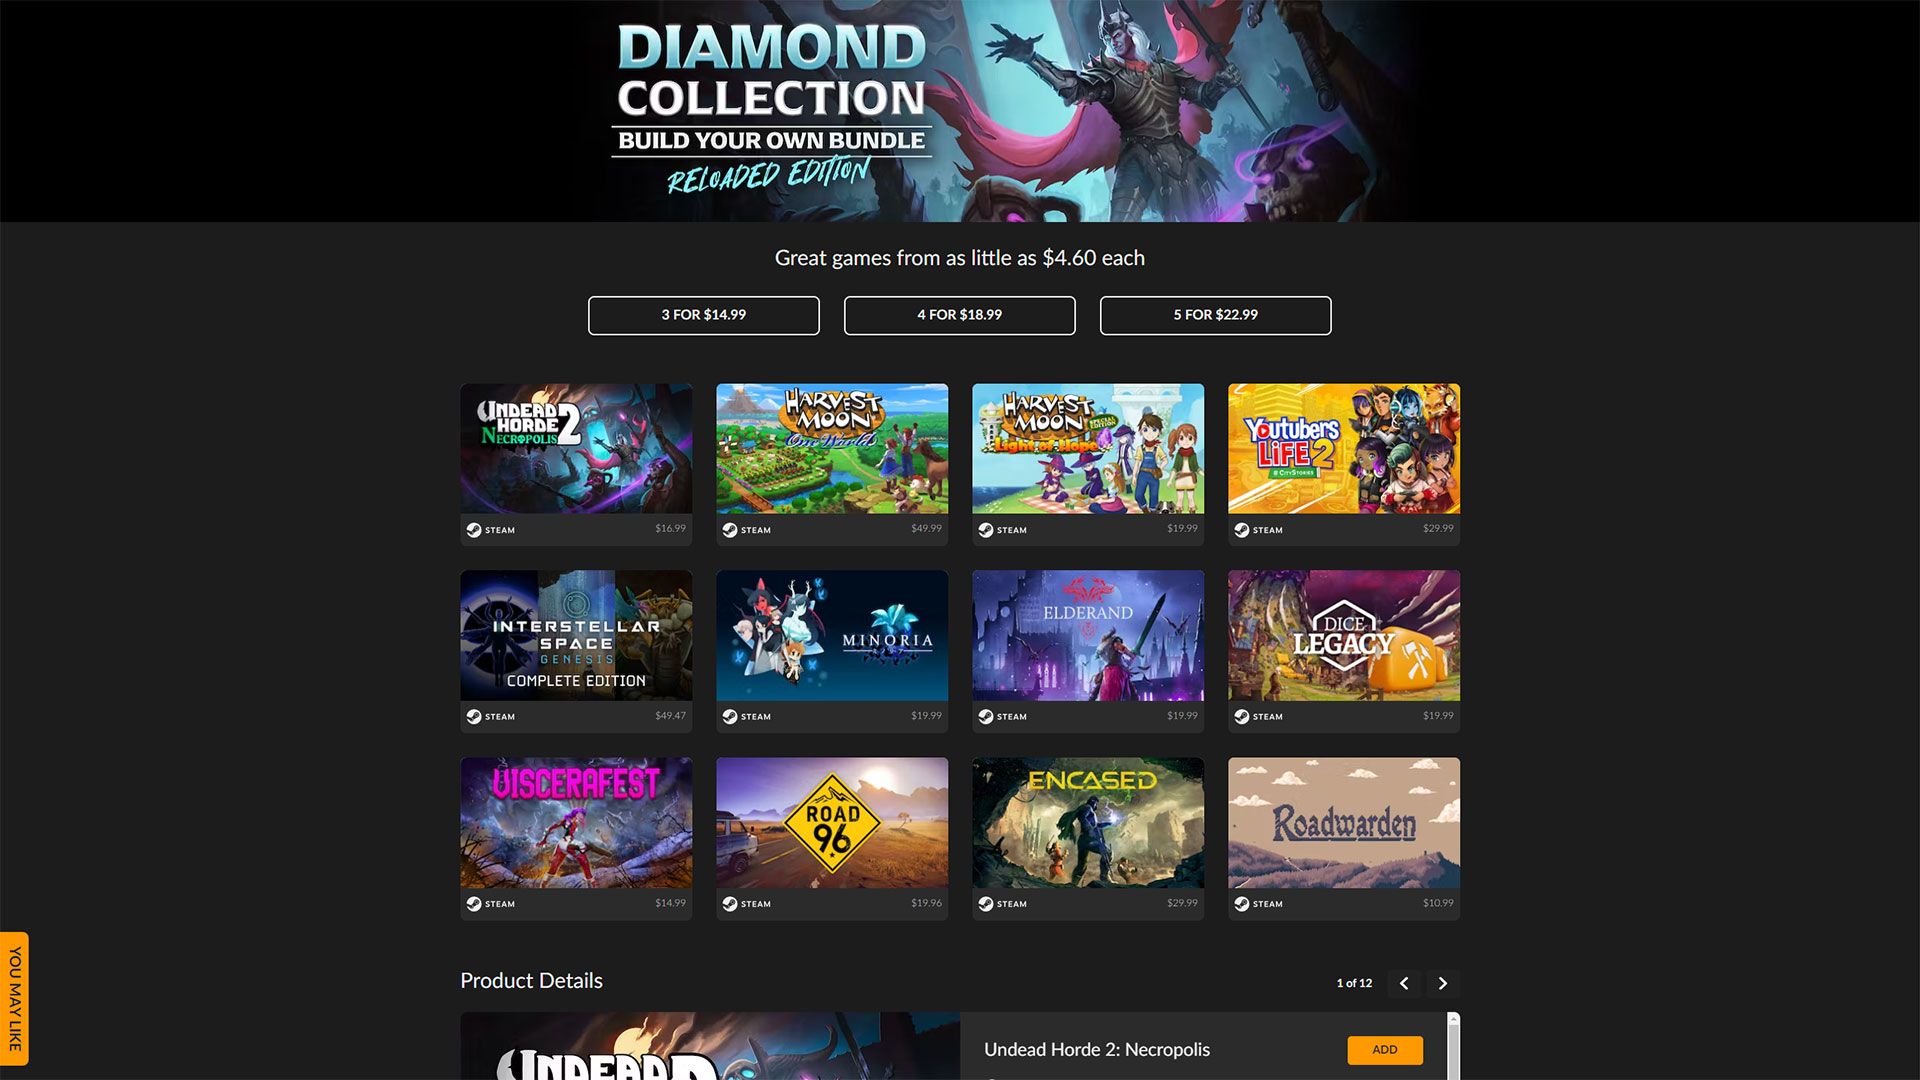 Fanatical's Build Your Own Bundle Diamond Collection Reloaded Edition gets you five games for $22.99